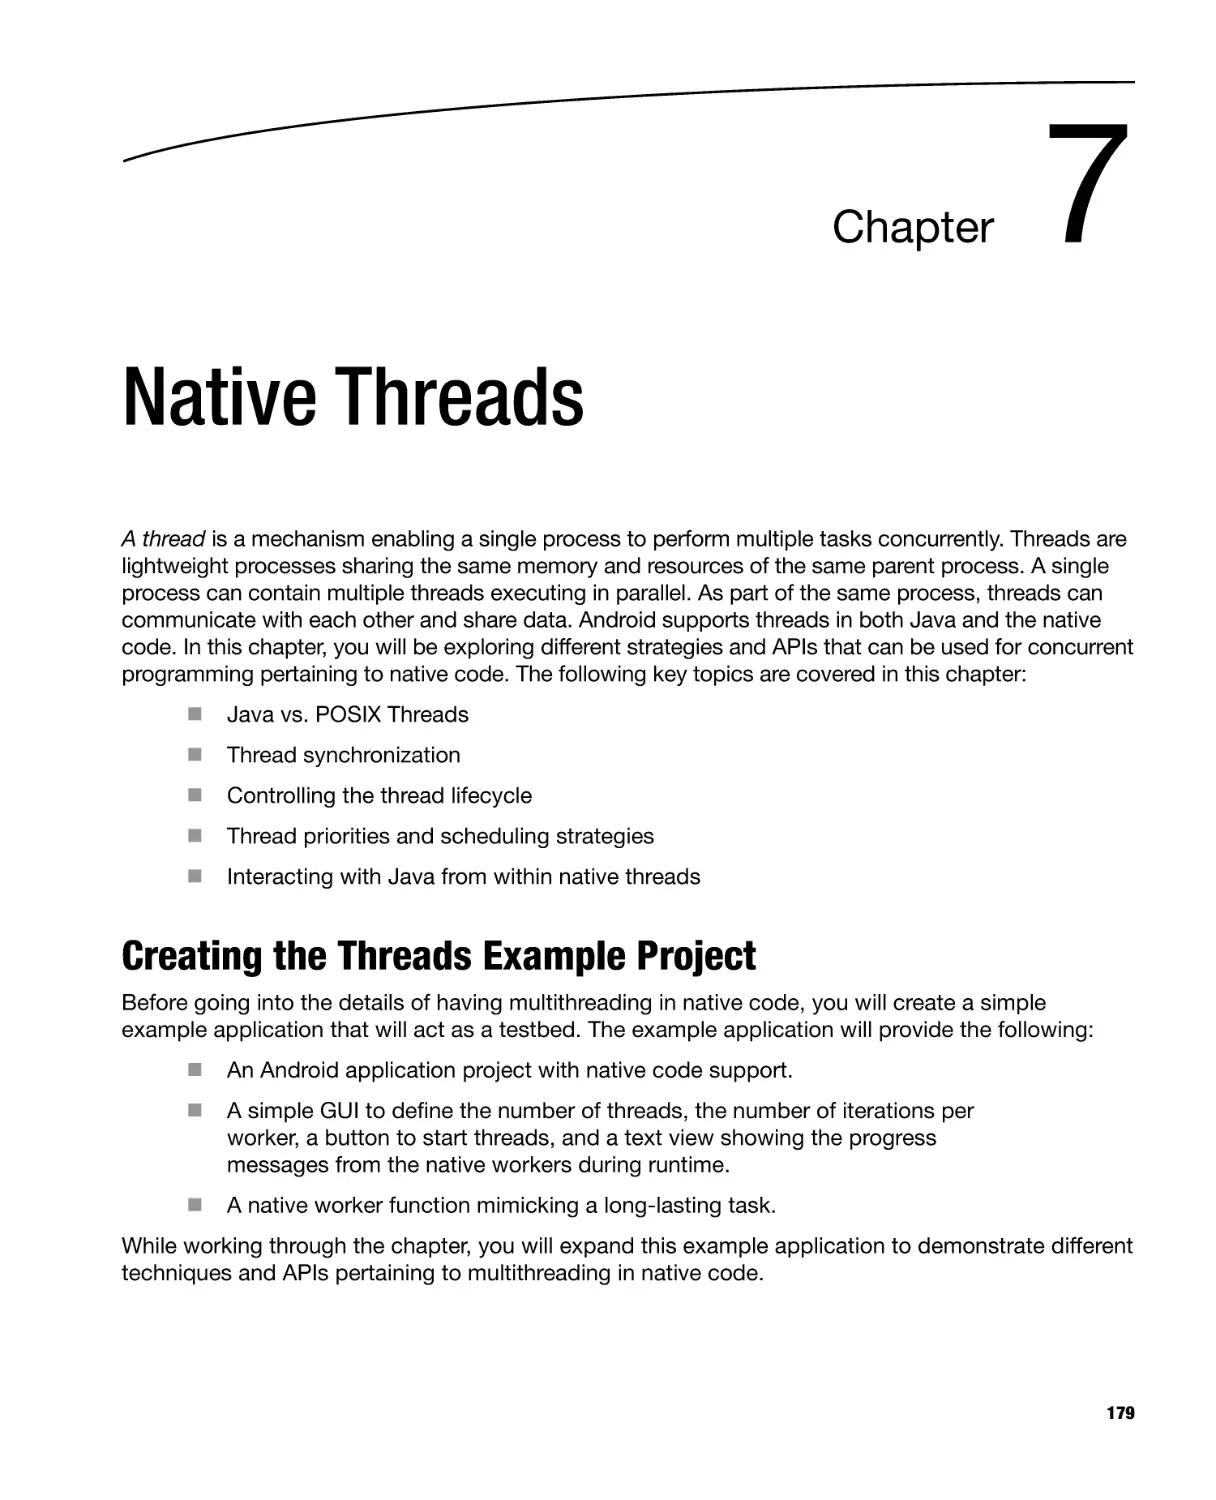 Chapter 7
Creating the Threads Example Project